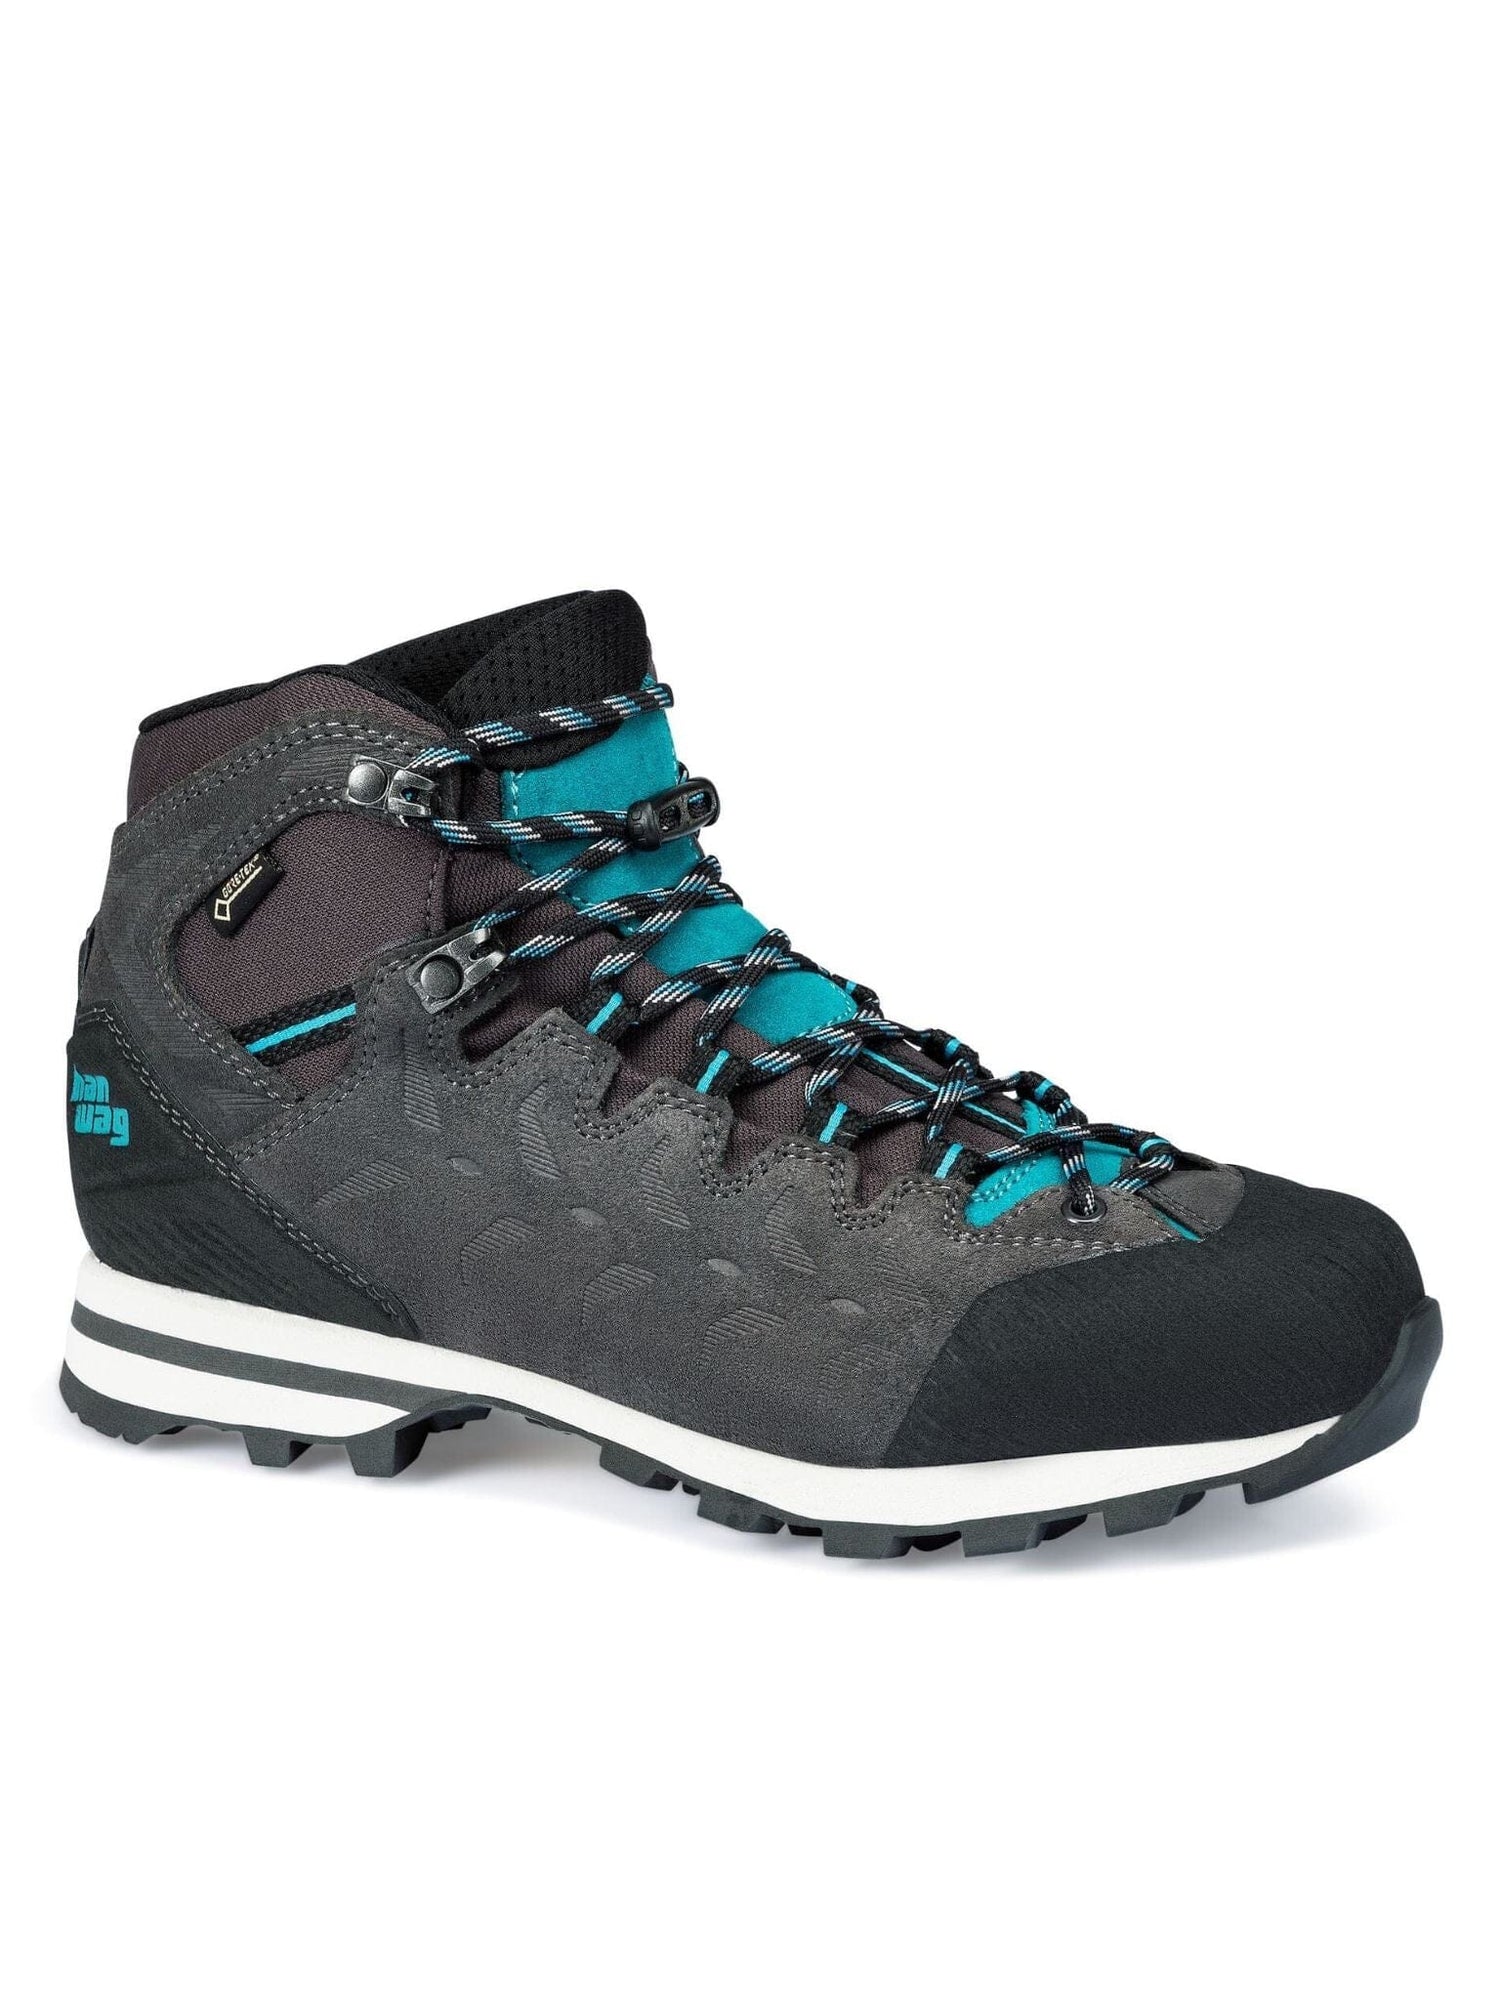 Hanwag W's Makra Light GTX - Leather Working Group -certified leather Asphalt Bluegreen Shoes